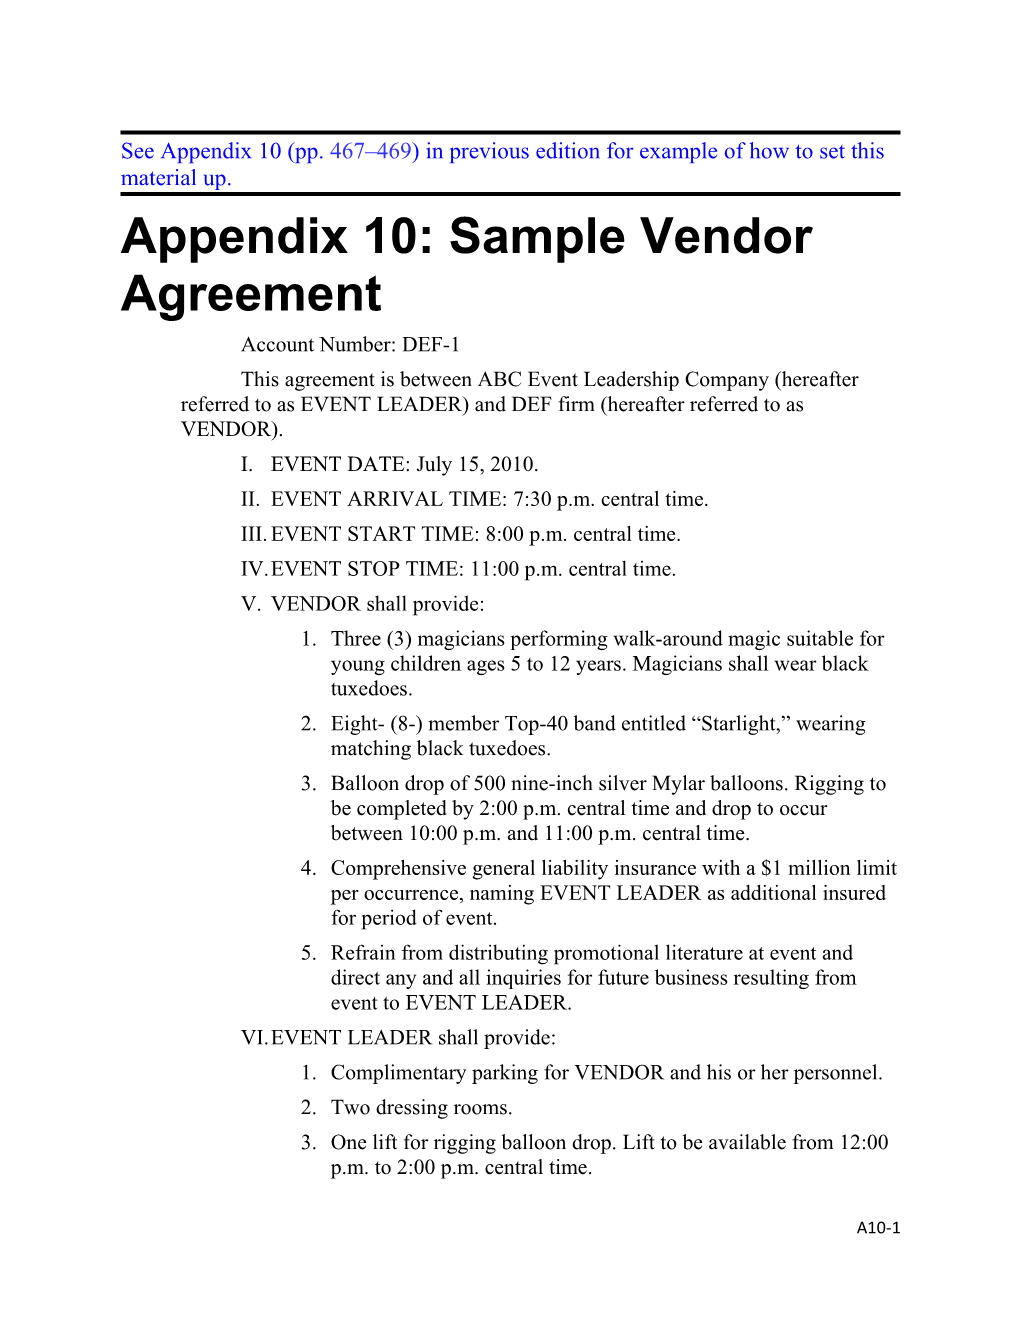 See Appendix 10 (Pp. 467 469) in Previous Edition for Example of How to Set This Material Up